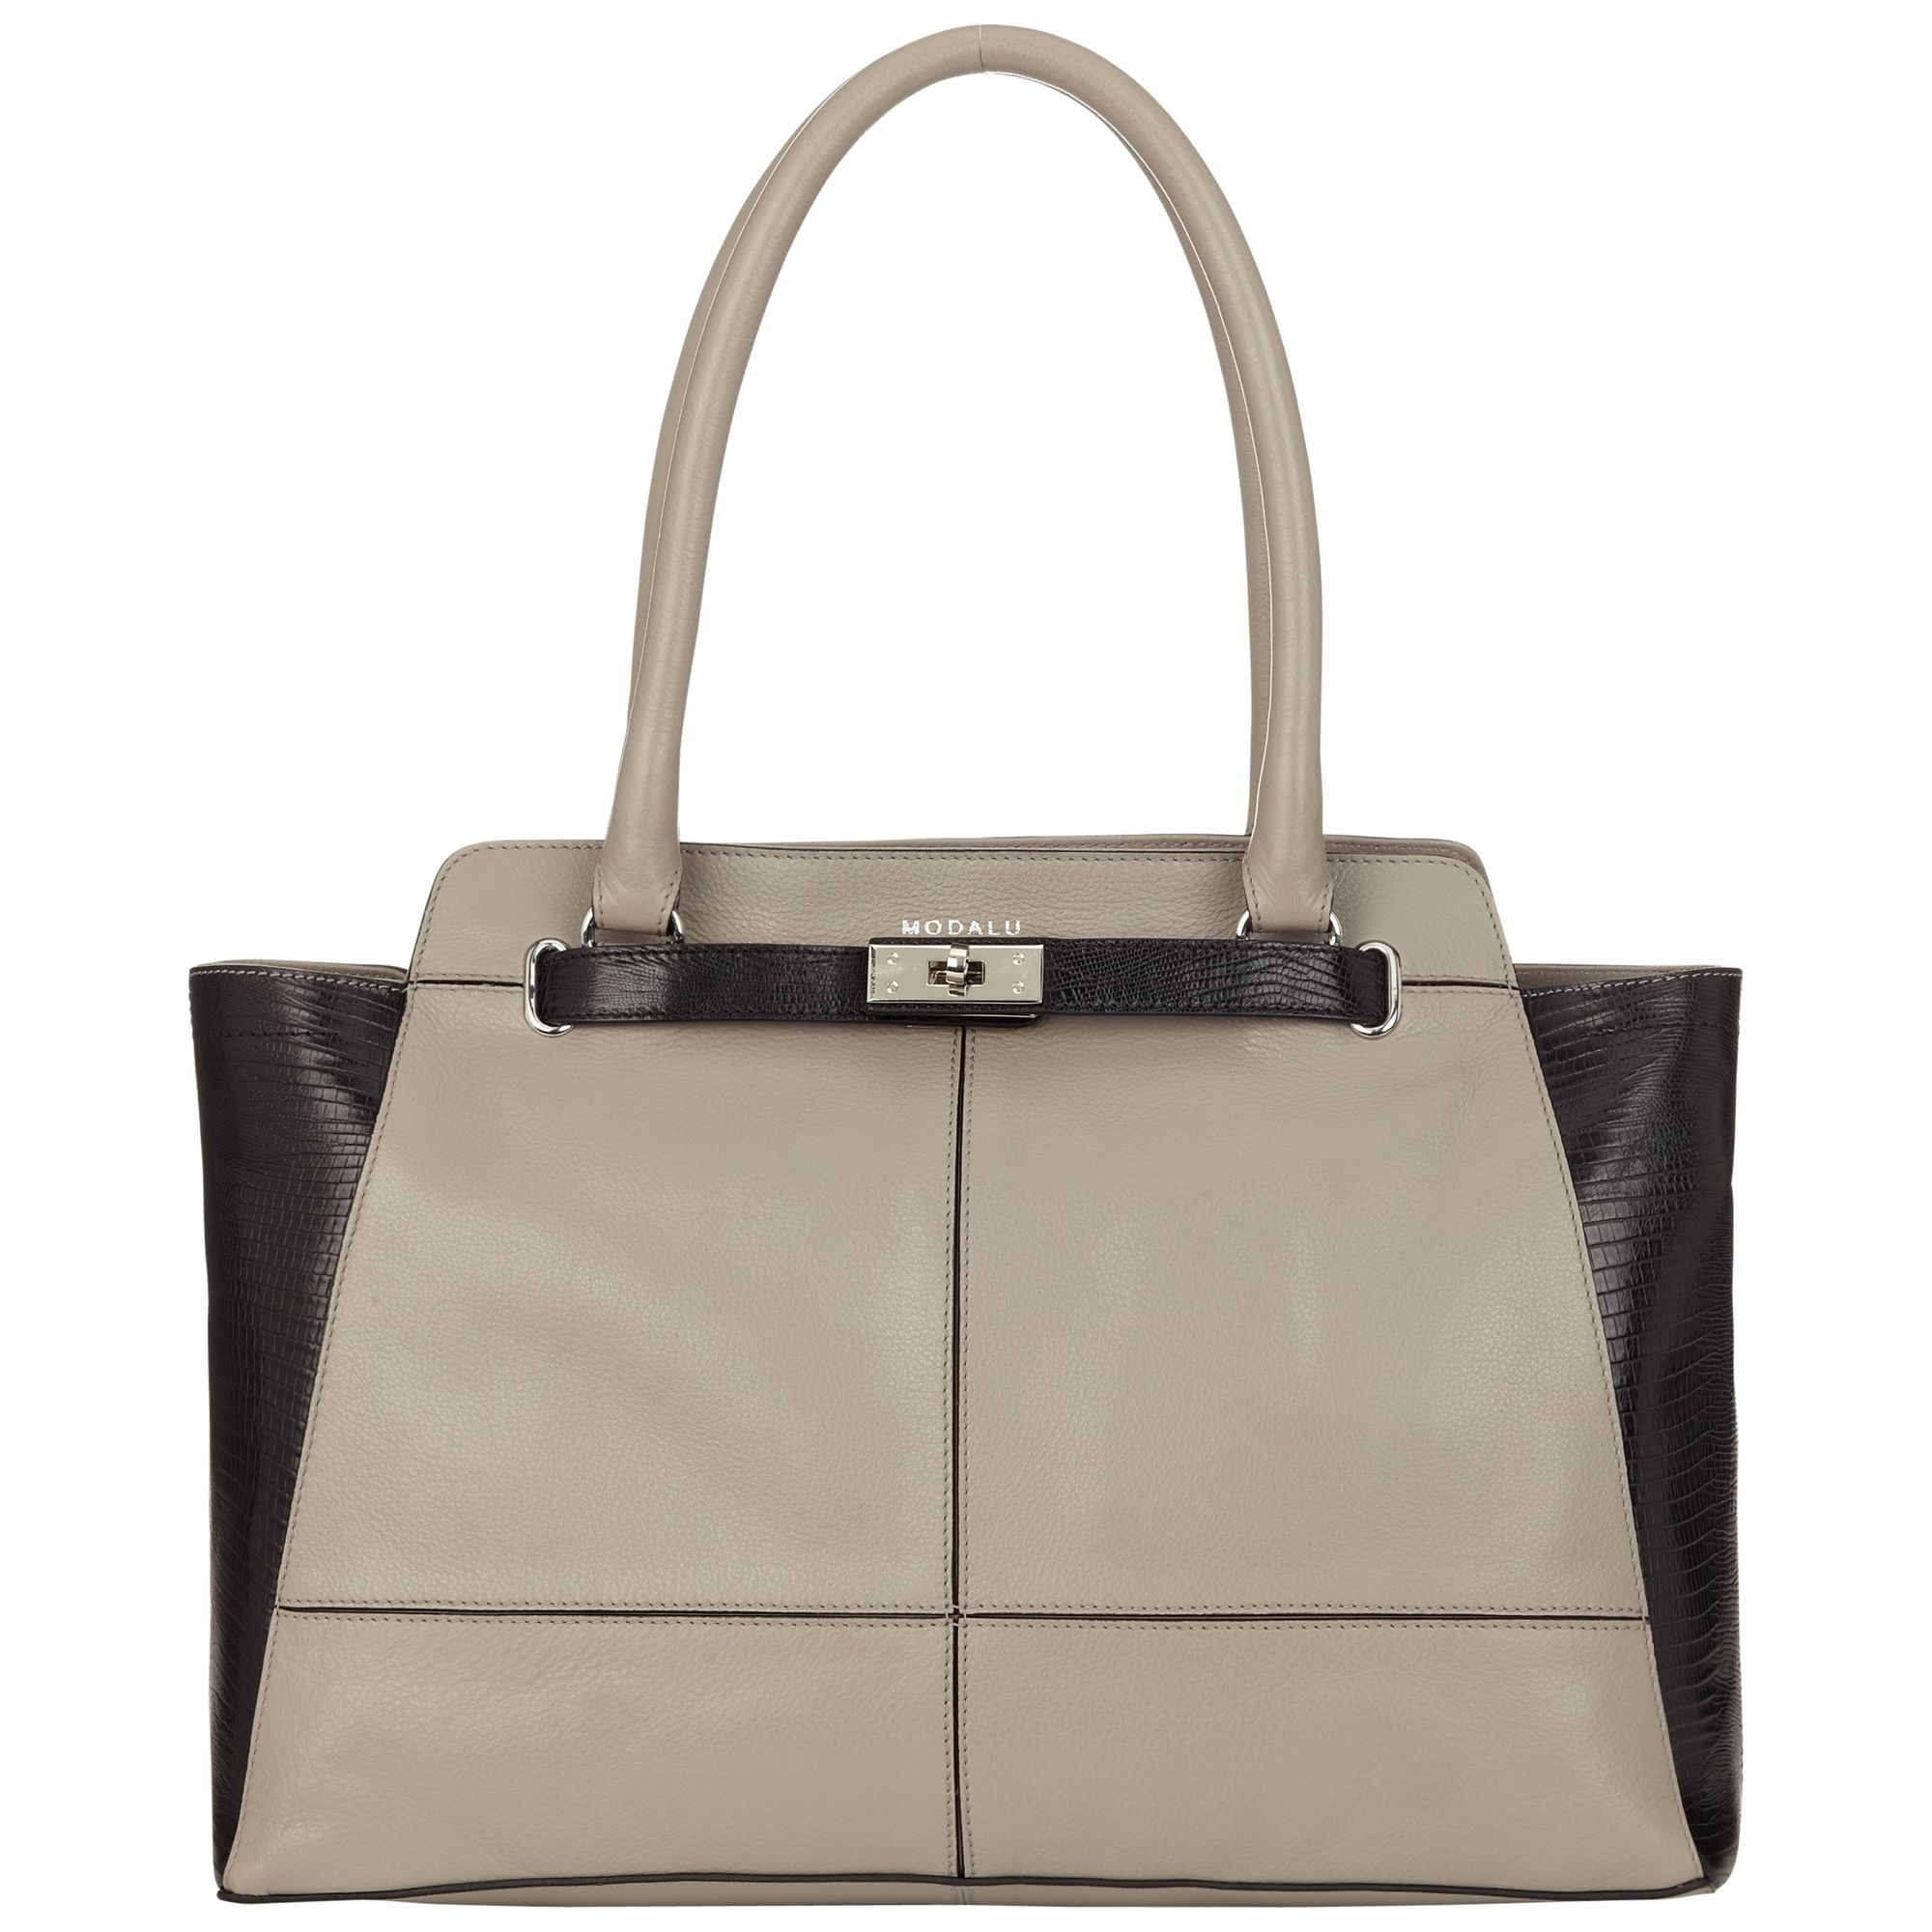 Modalu Marlow East/West Leather Tote Bag